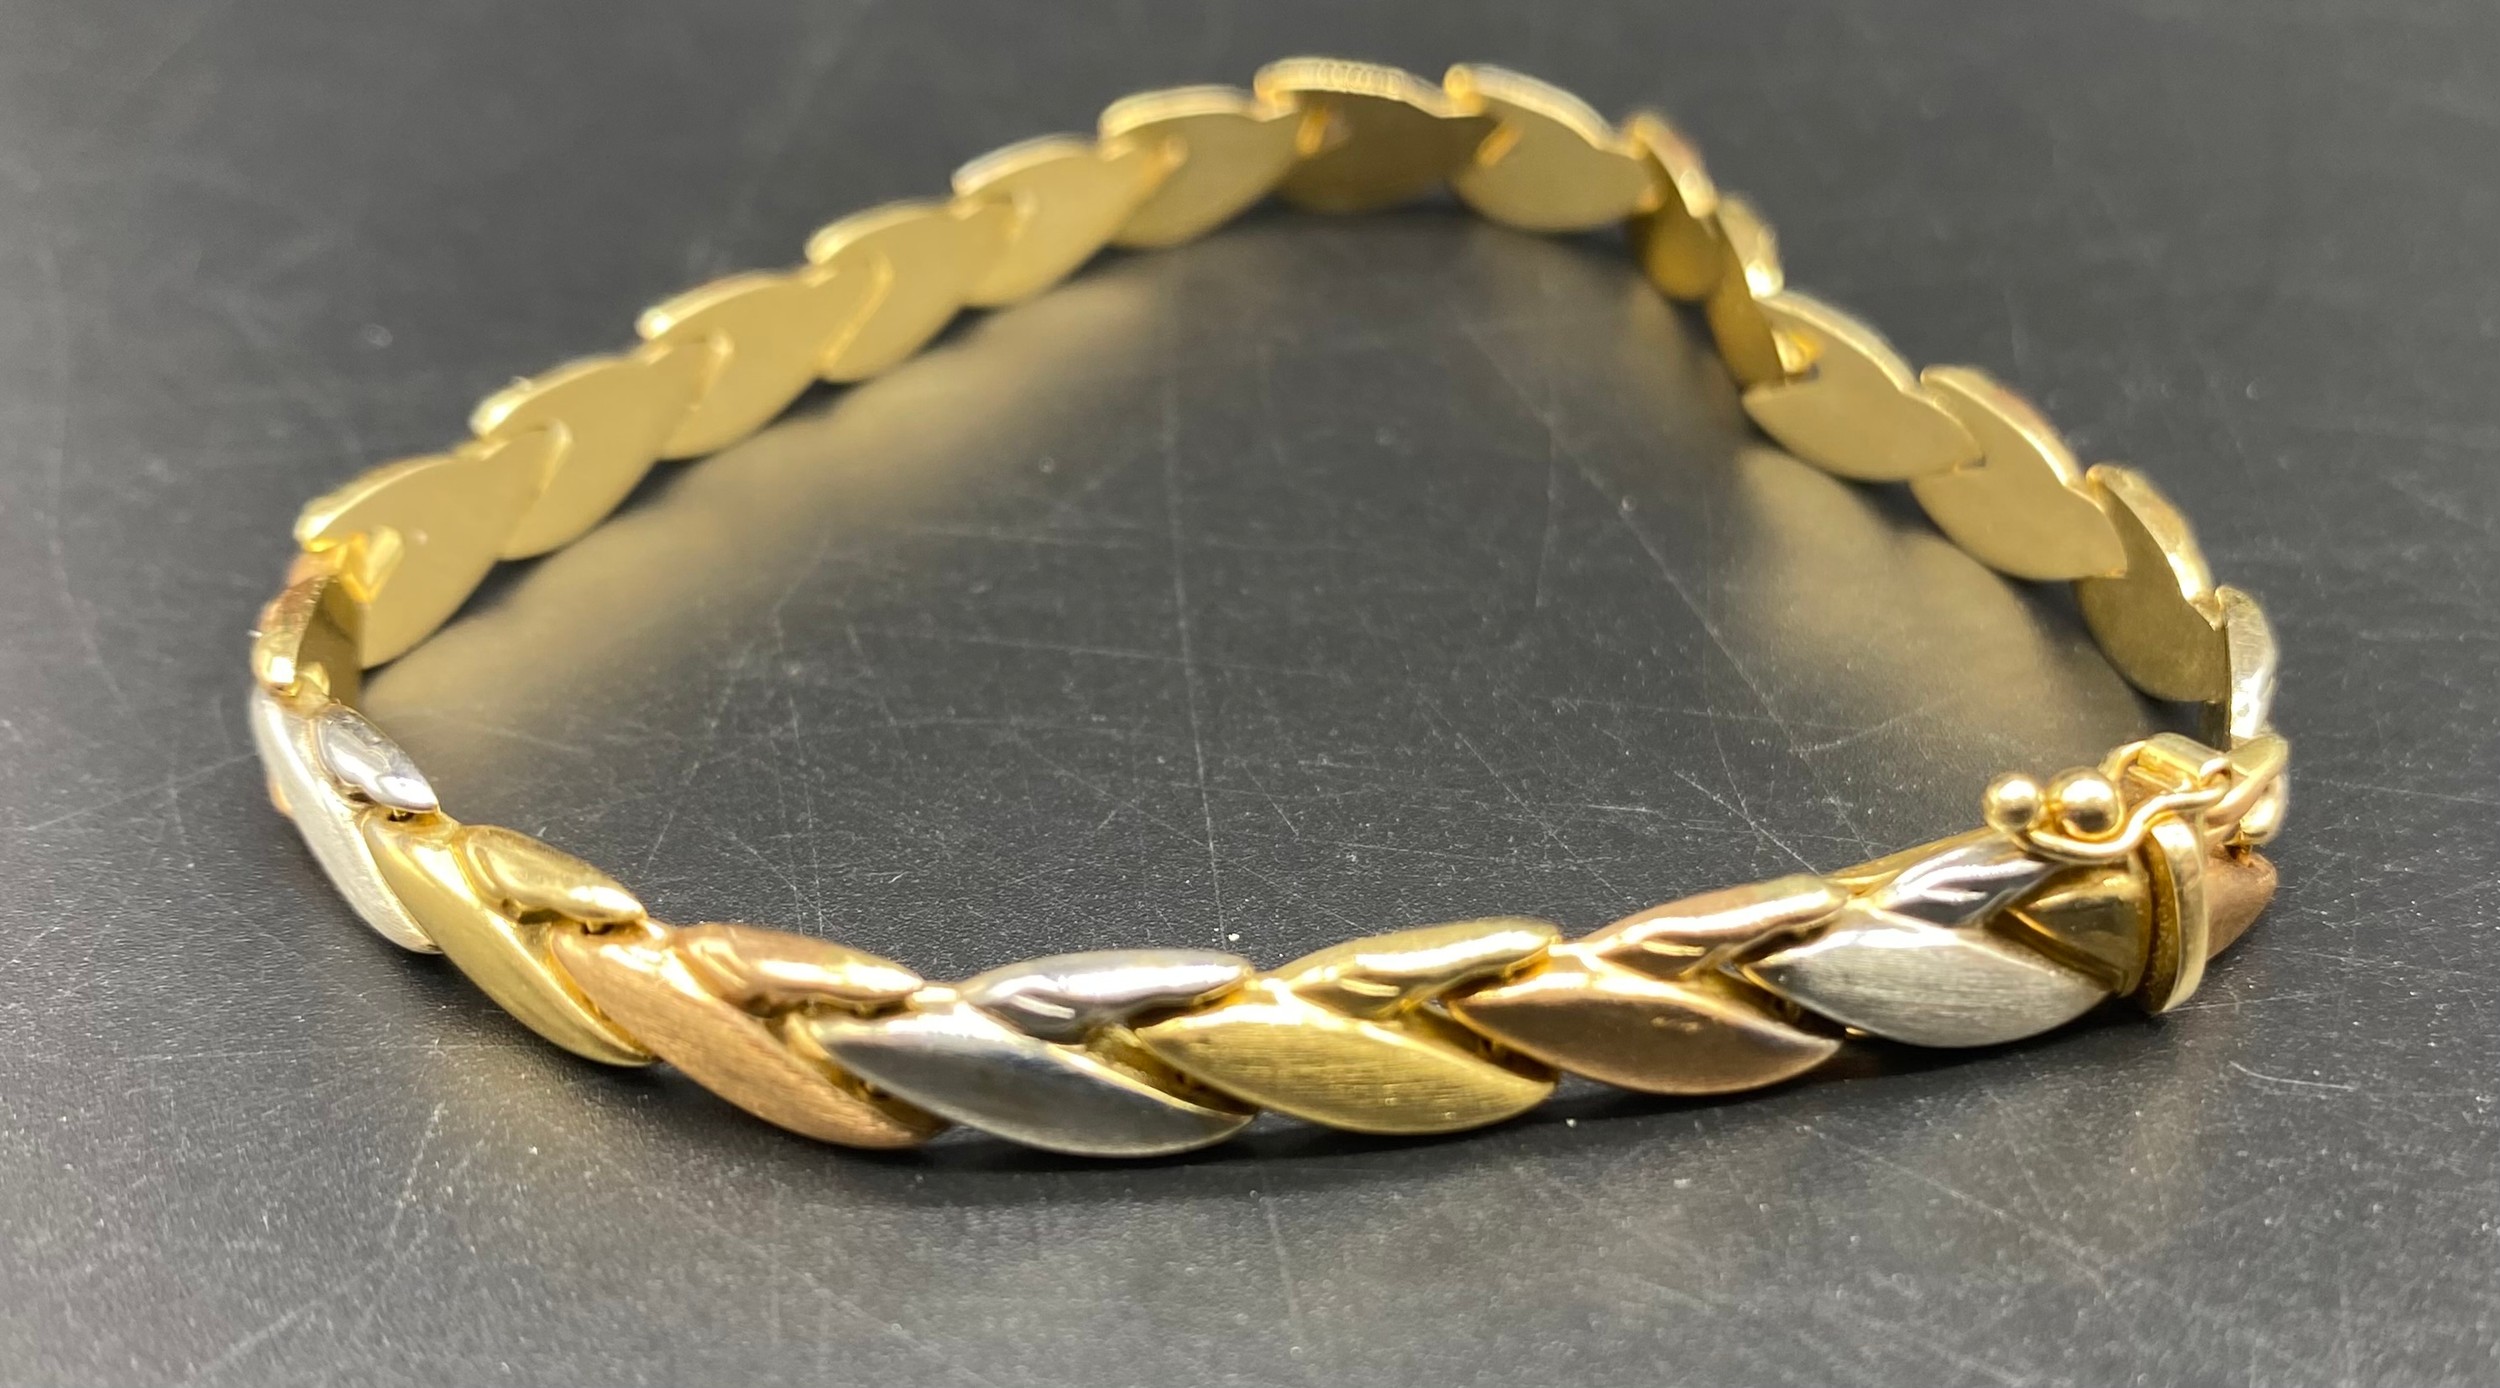 14ct gold 585 hall marked two tone set bracelet [8.43] grams - Image 2 of 3